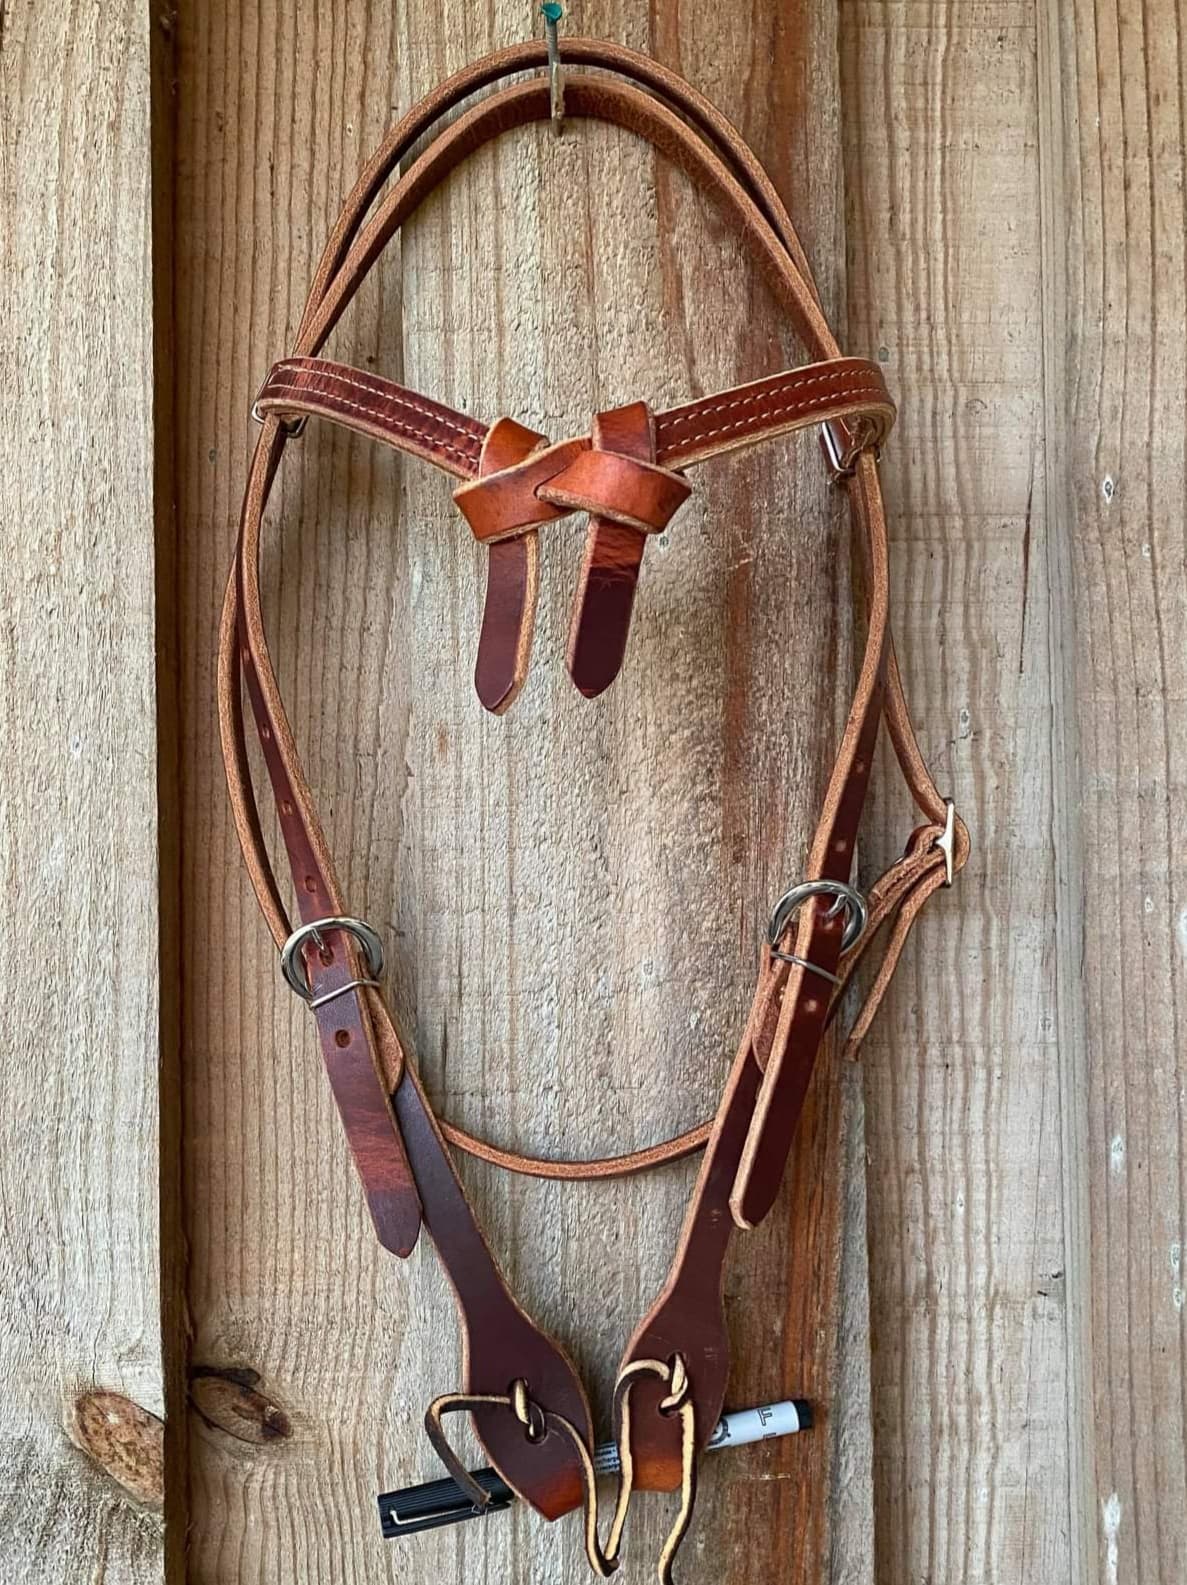 Western Bridle Browband Headstall Futurity Knot Harness Leather